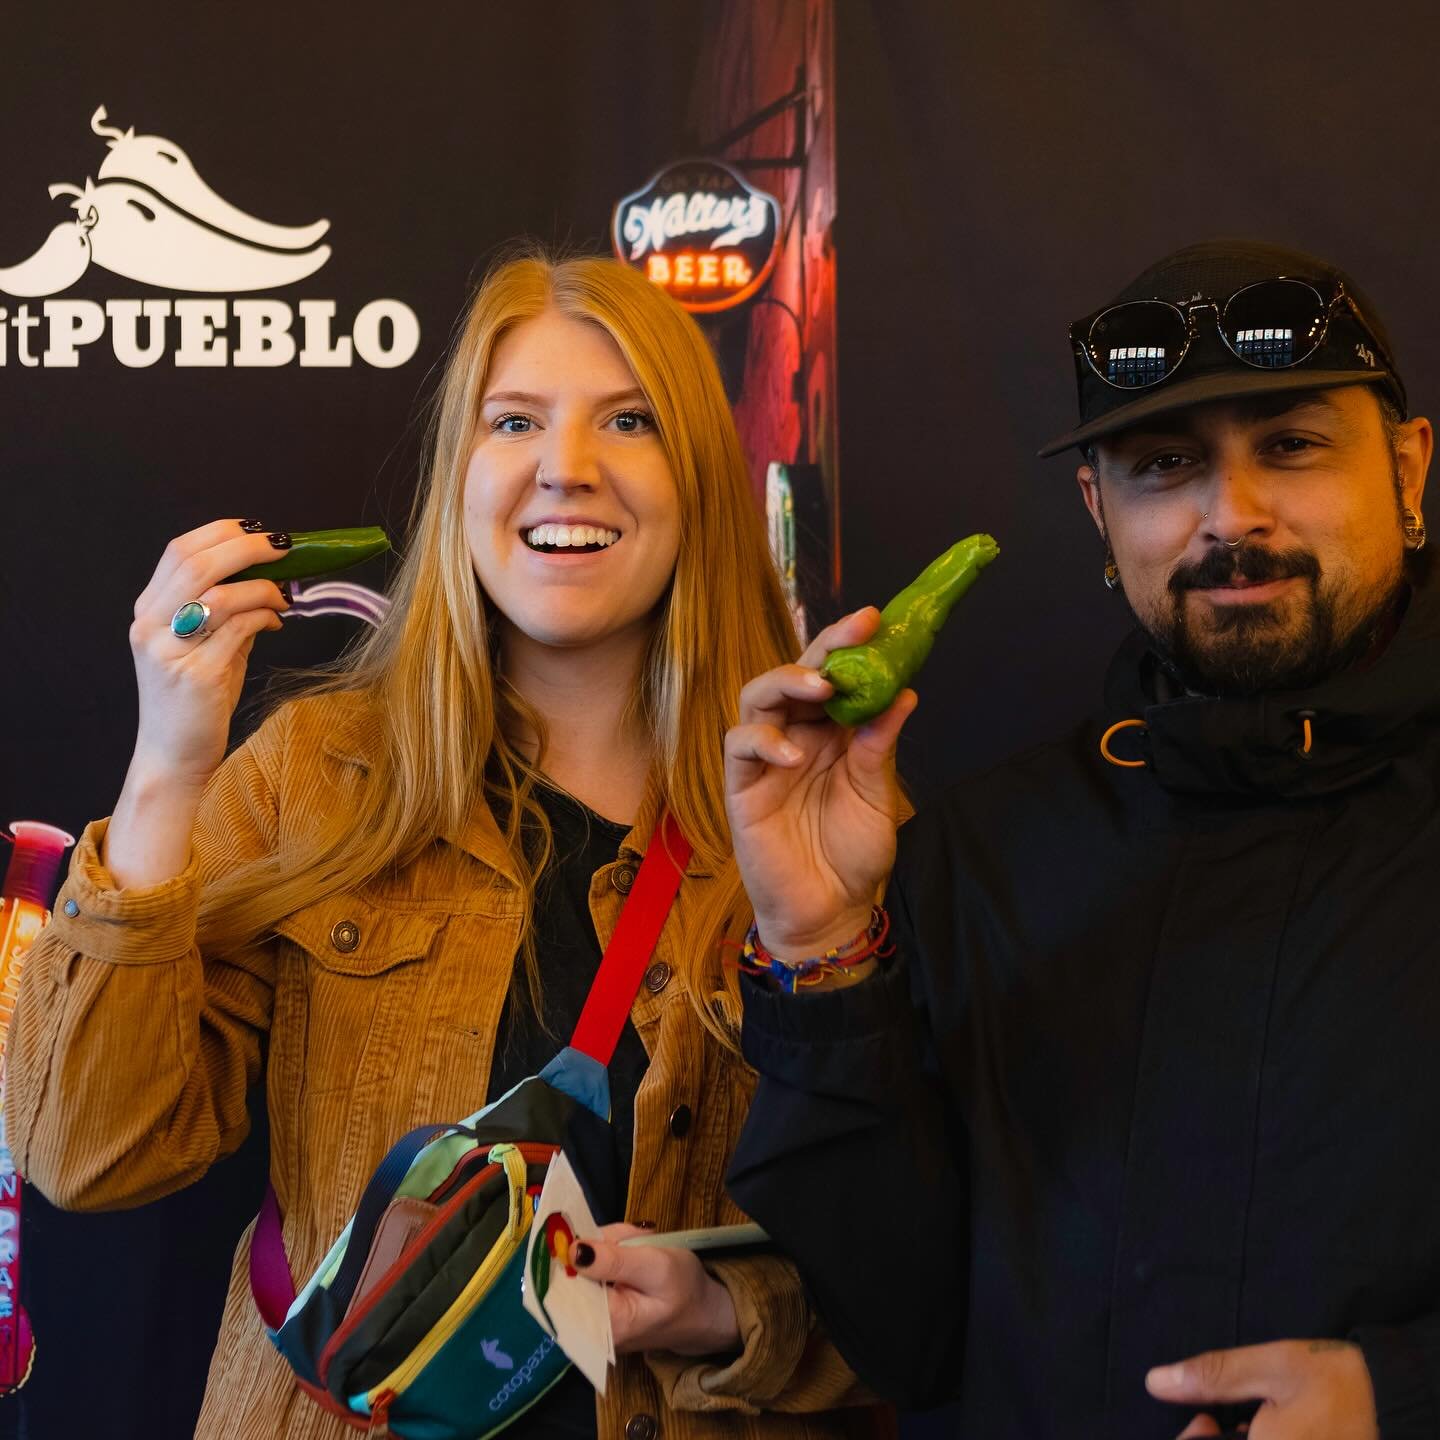 When you&rsquo;re in @visitpueblo - you&rsquo;re probably gonna have some green chile. Our October 12th event is available in 15, 40, 75 &amp; 110 mile flavors. How spicy do you want it? Registration link is in the bio. 
📸 @tribby.photography &amp; 